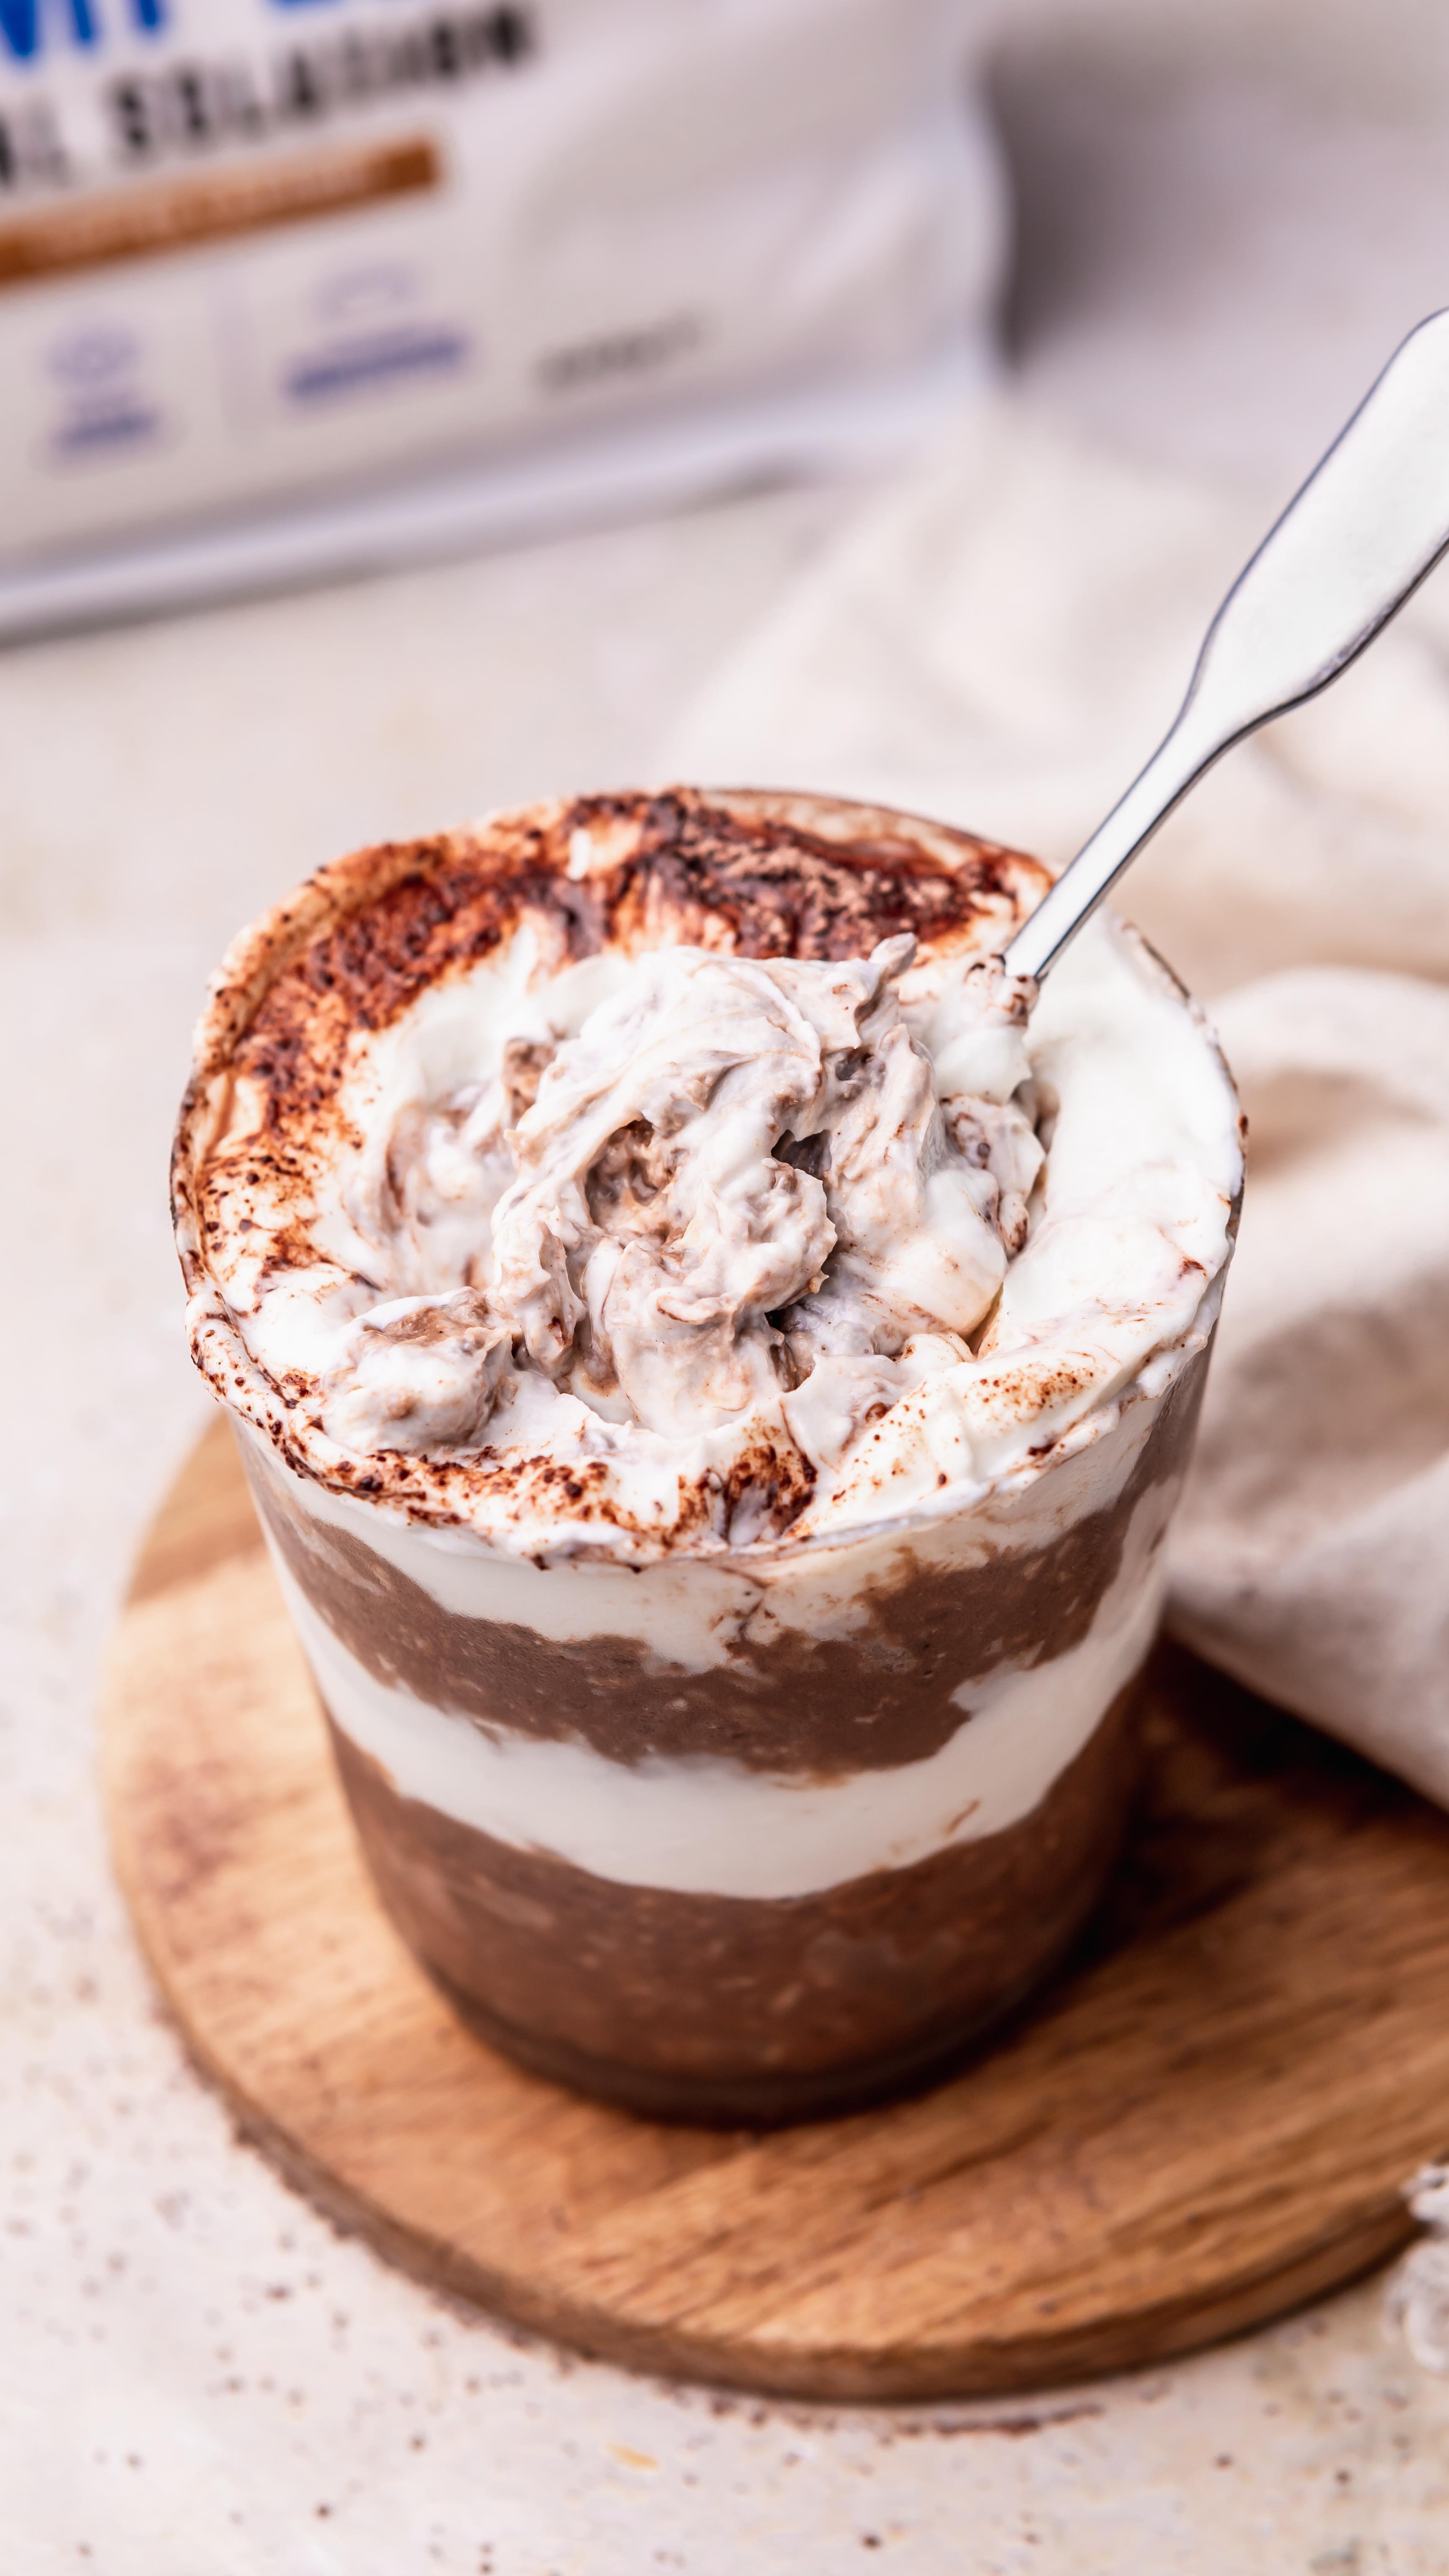 TIRAMISU OVERNIGHT OATS

Here’s one for you to try over the weekend! A classic dessert made into overnight oats! I use a coffee caramel flavour protein powder but anything like chocolate, caramel or coffee will work too. Hit save to give this one a try 😍

SERVES 1
READY IN 15 MINS OVERNIGHT CHILL

KCAL 448
FAT 12g
CARBS 46g
PROTEIN 39g

INGREDIENTS

40g rolled oats
1 tbsp chia seeds
1/2 tbsp cocoa powder
1 scoop protein powder (I used PHD Life Complete, coffee caramel)
1 shot Espresso
120ml unsweetened almond milk
150g greek yogurt
To serve-
Sprinkle of cocoa or hot chocolate powder

METHOD

1. To a bowl, add the oats, chia seeds, cocoa powder, protein powder/Life Complete, espresso and milk. Mix until fully combined.
2. To a serving glass, spoon in half the oat mixture, top with half the greek yogurt. Repeat, finishing with the yogurt.
3. Refrigerate overnight. Serve with a sprinkle of cocoa powder/hot chocolate powder over the top.

#overnightoats #tiramisu #proteinreels #breakfastreels #healthyrecipes #recipecreator #contentcreator #canon5dmarkiv #foodtographyschool #biteshot